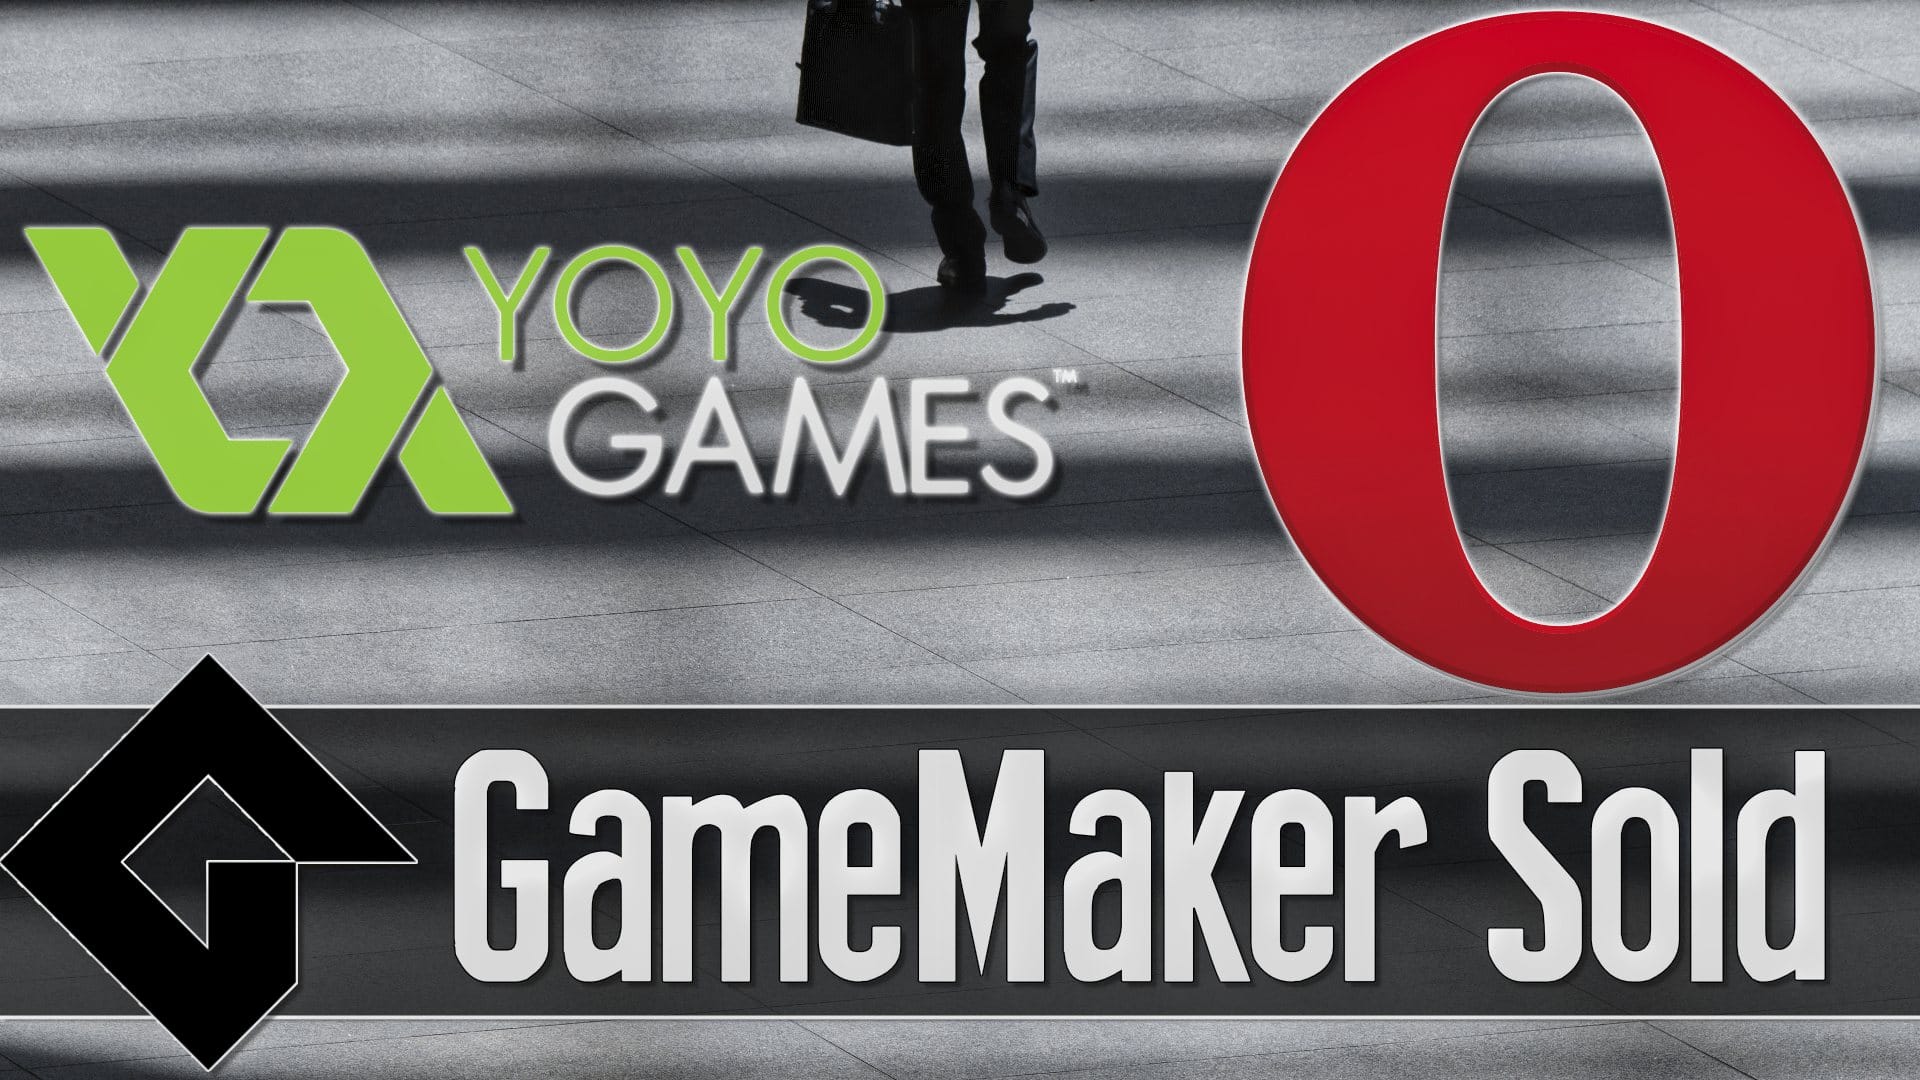 Opera acquires YoYo Games for $10 million and launches Opera Gaming  division